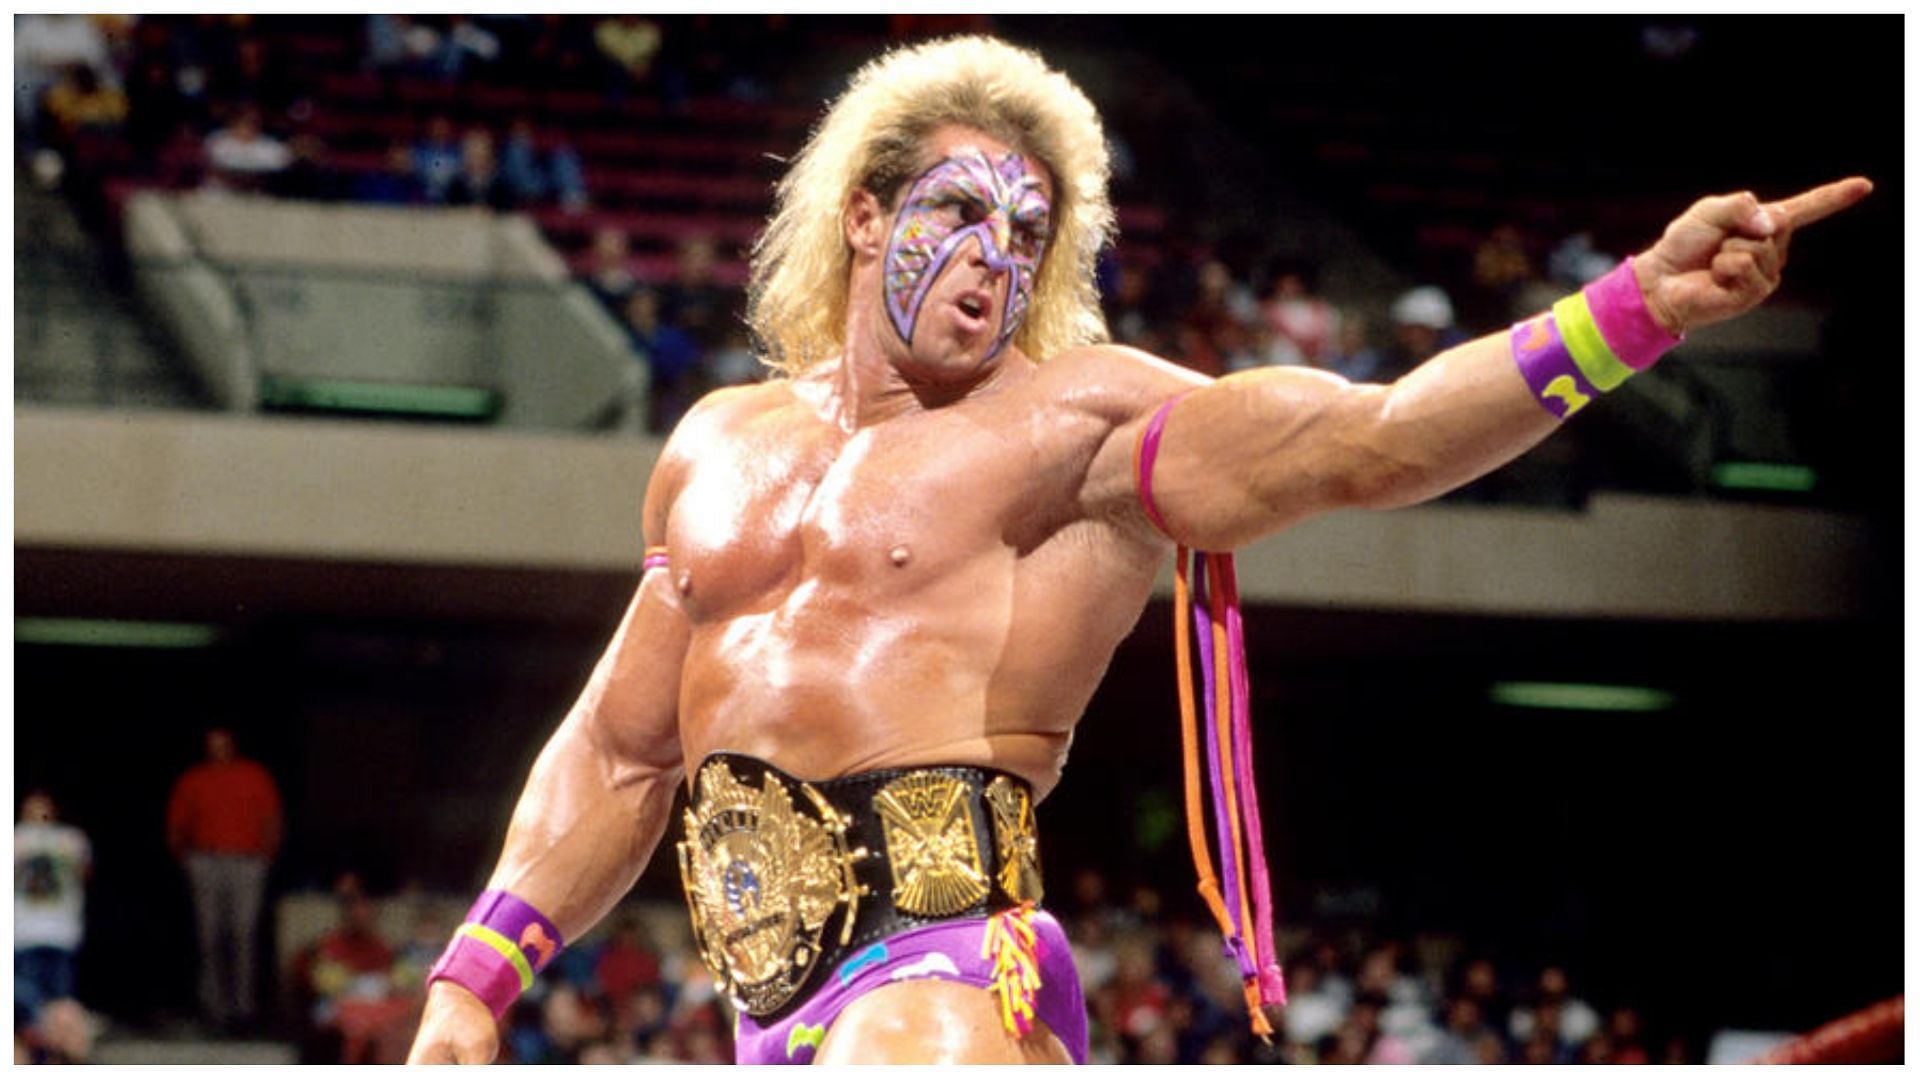 WWE Legend The Ultimate Warrior and his iconic face paint (Image via WWE)